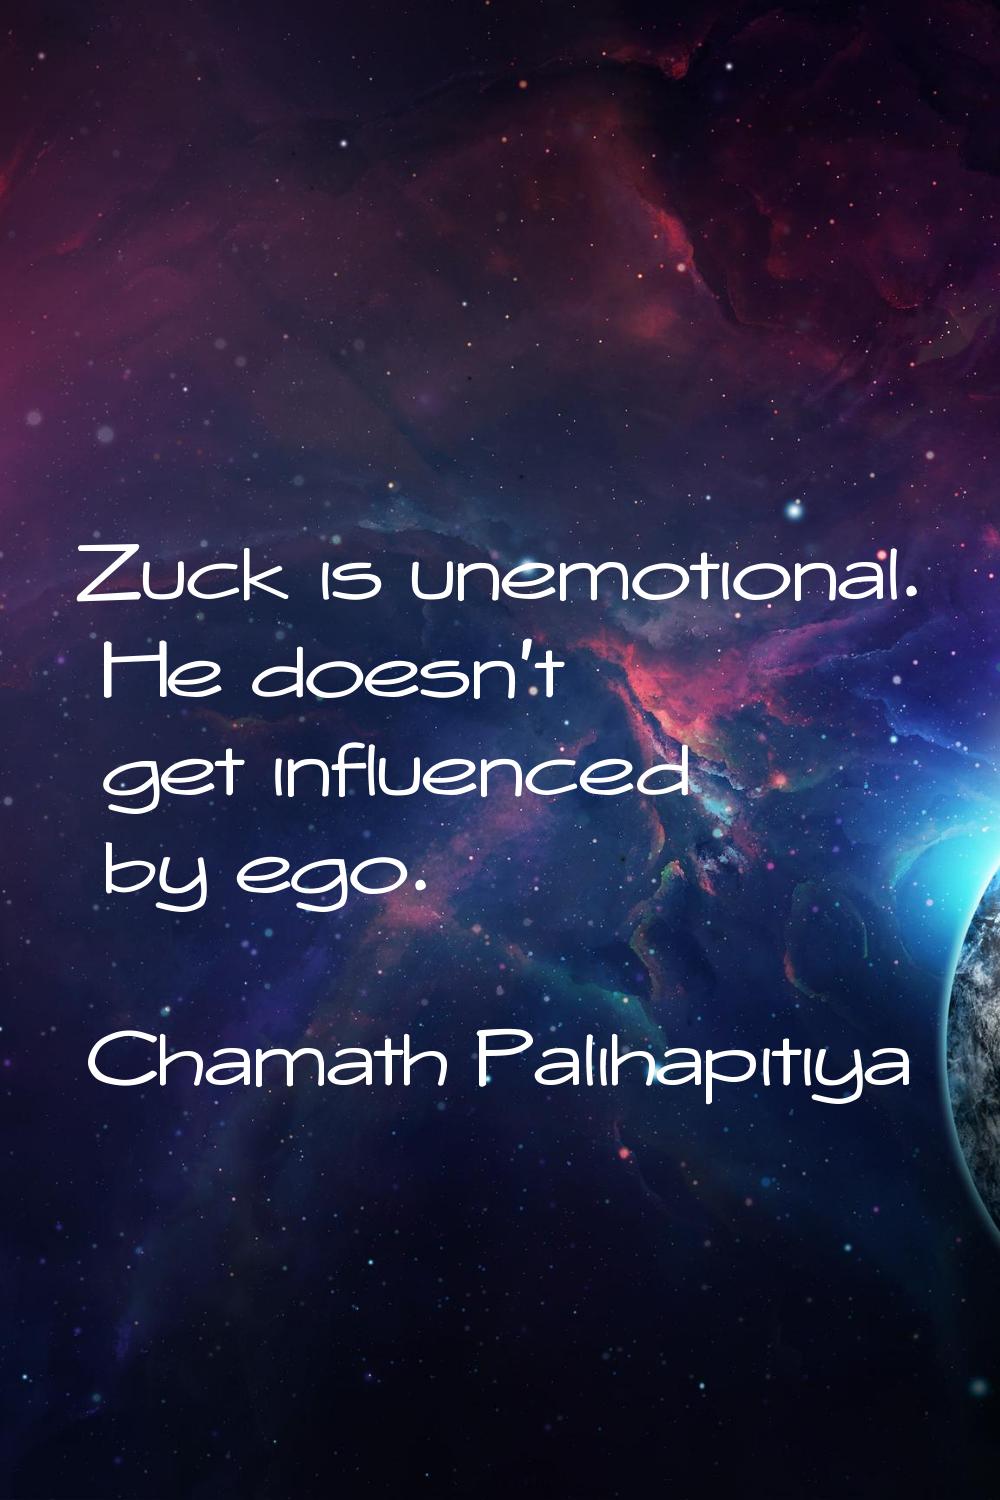 Zuck is unemotional. He doesn't get influenced by ego.